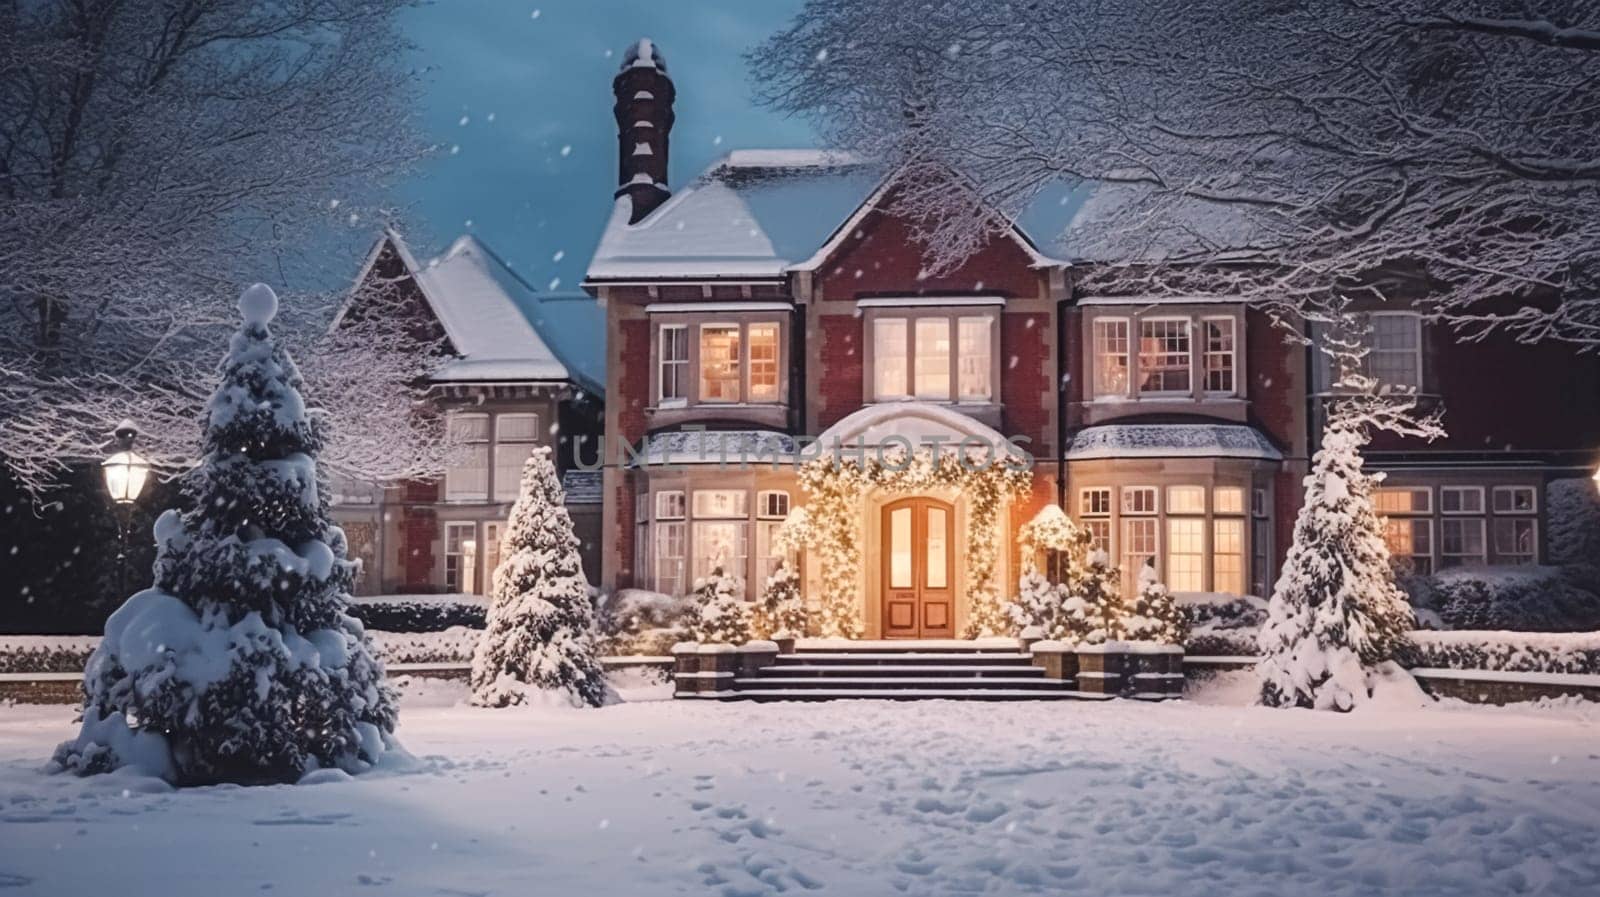 Christmas in the countryside manor, English country house mansion decorated for holidays on a snowy winter evening with snow and holiday lights, Merry Christmas and Happy Holidays design